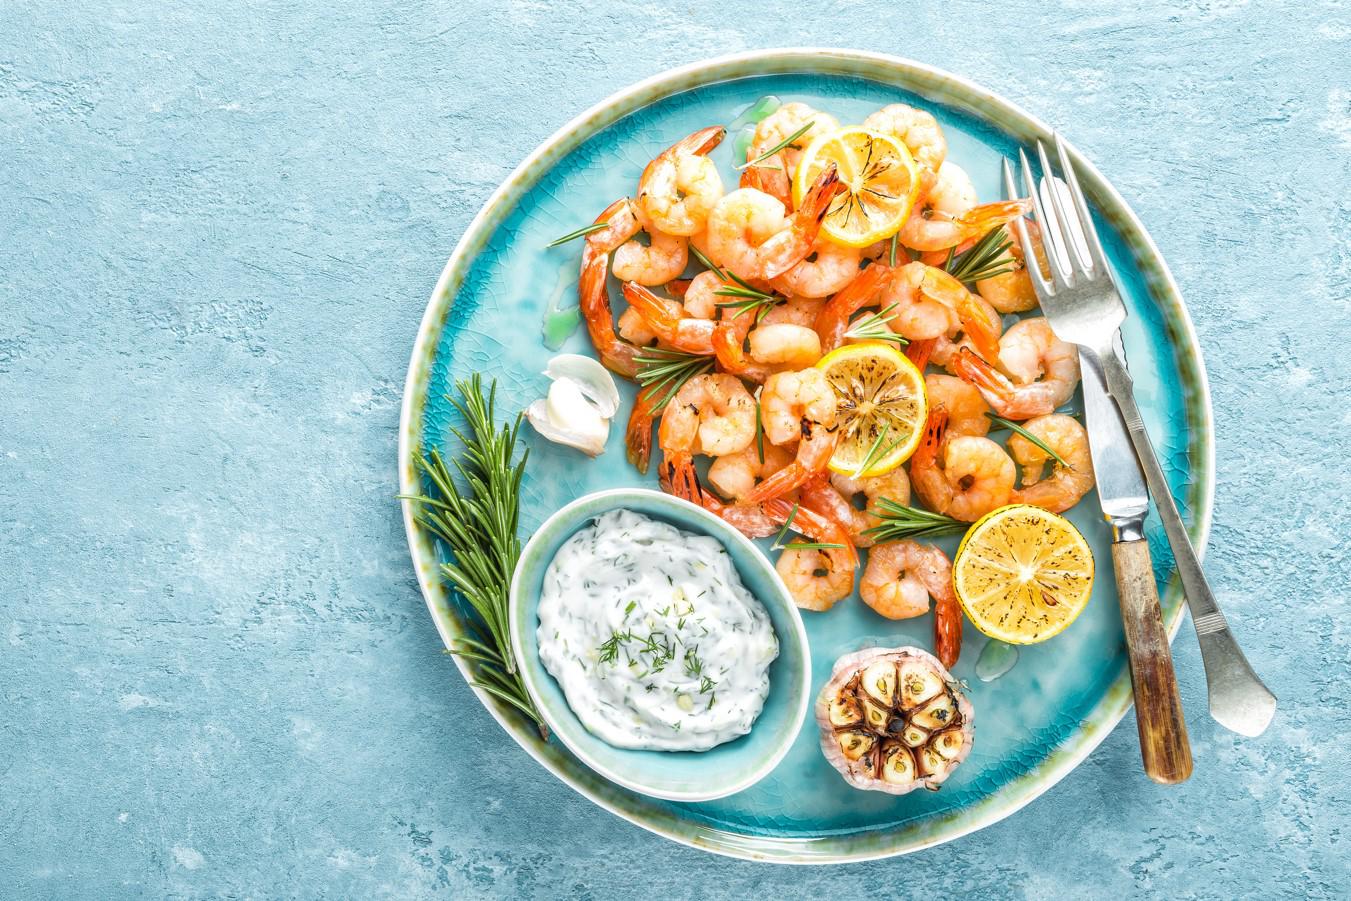 Shrimp —  this is one of the richest seafood in cholesterol: 100g of shrimp contains an average of 150-160g of cholesterol